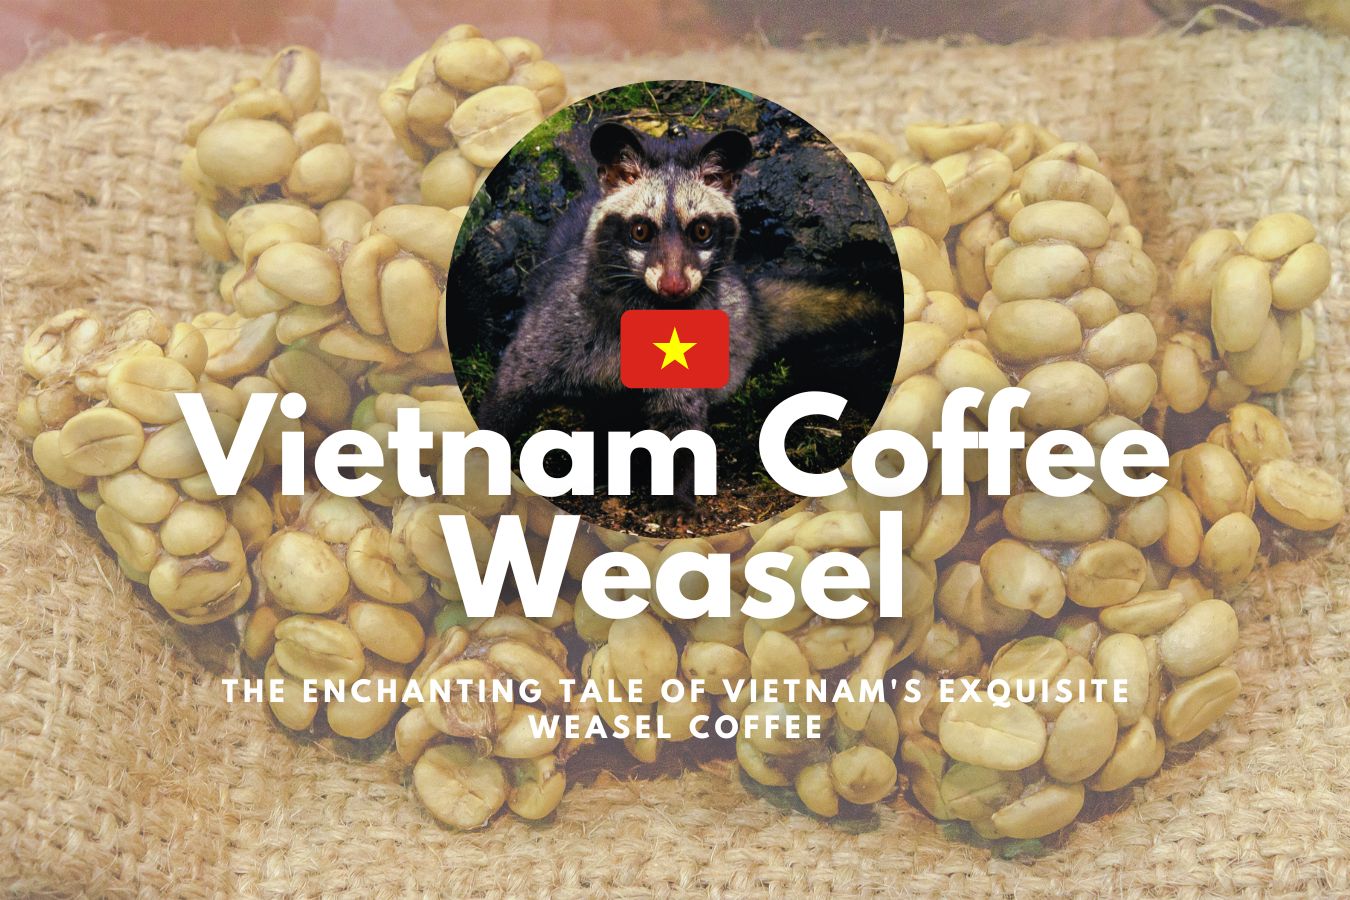 The Story of Vietnamese Weasel Coffee The Enchanting Tale of Vietnam's Exquisite Weasel Coffee